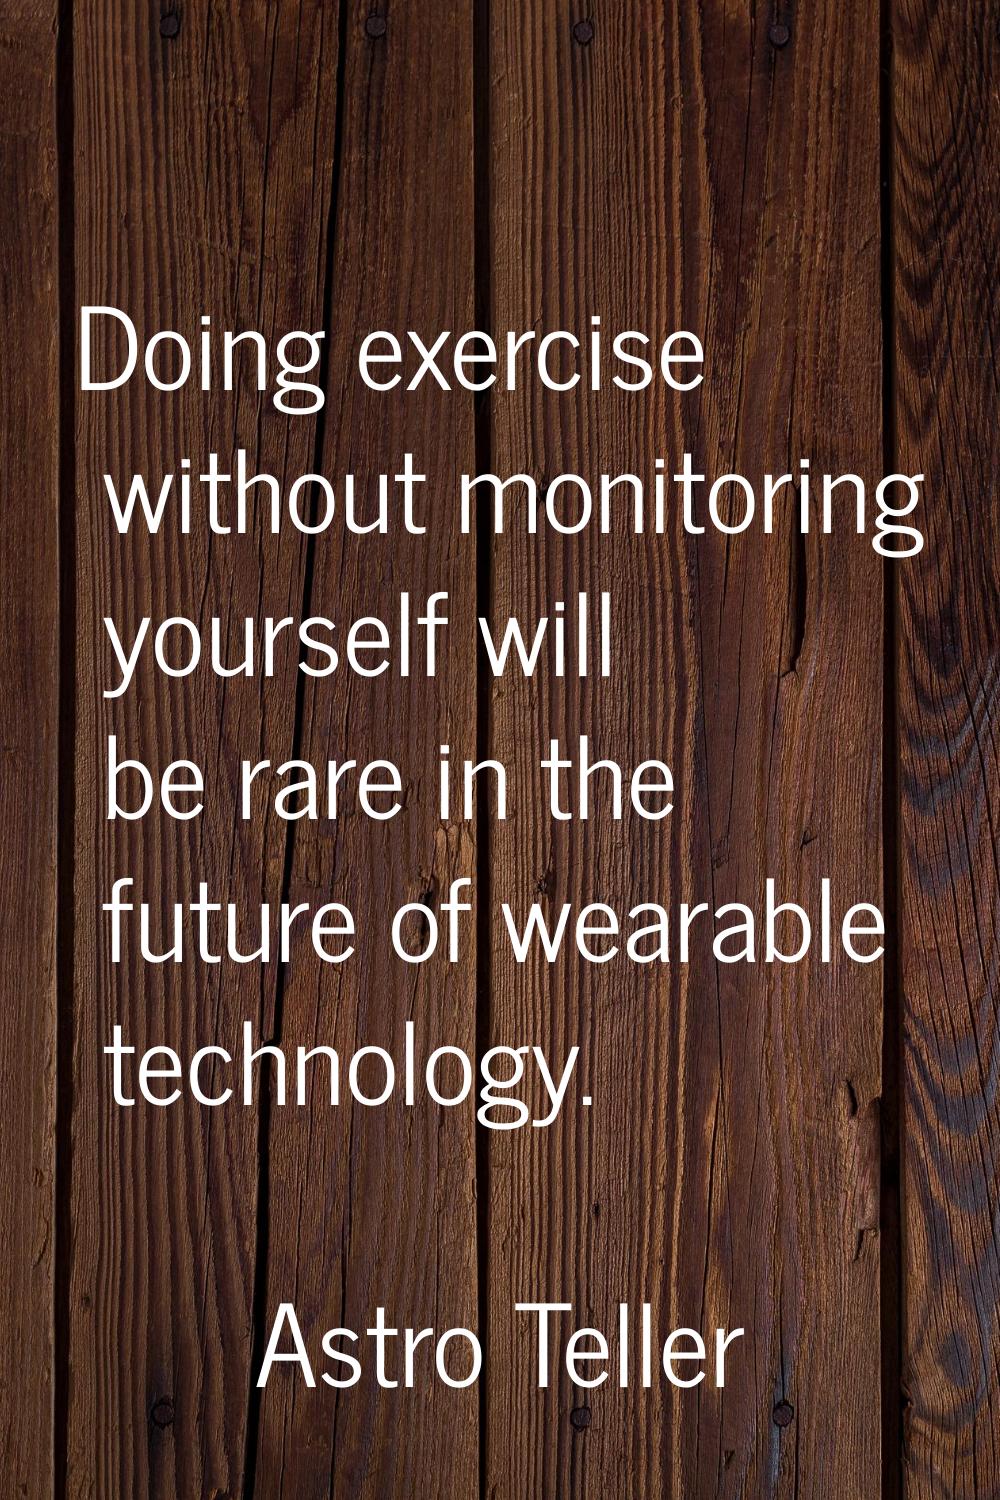 Doing exercise without monitoring yourself will be rare in the future of wearable technology.